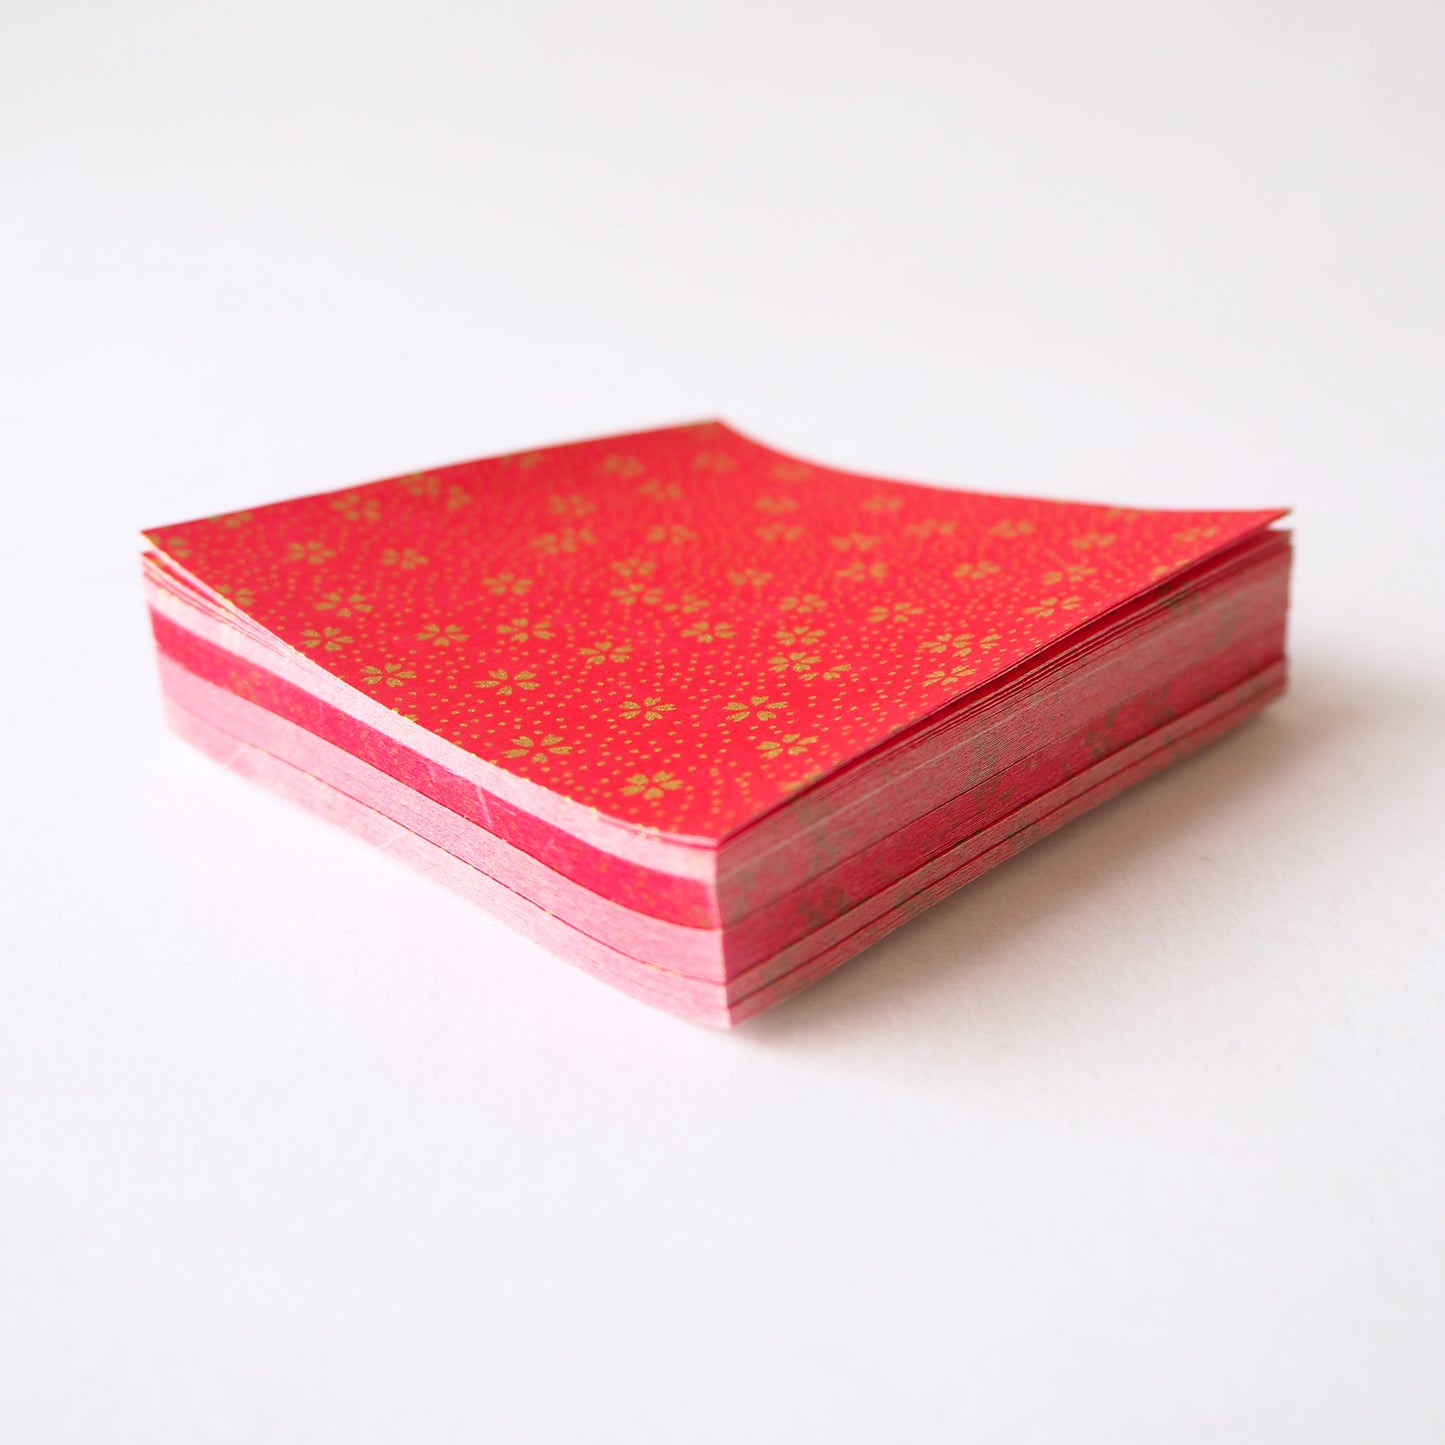 Pack of 100 Sheets 7x7cm Yuzen Washi Origami Paper HZ-502 - Small Gold Cherry Blossom Red - washi paper - Lavender Home London